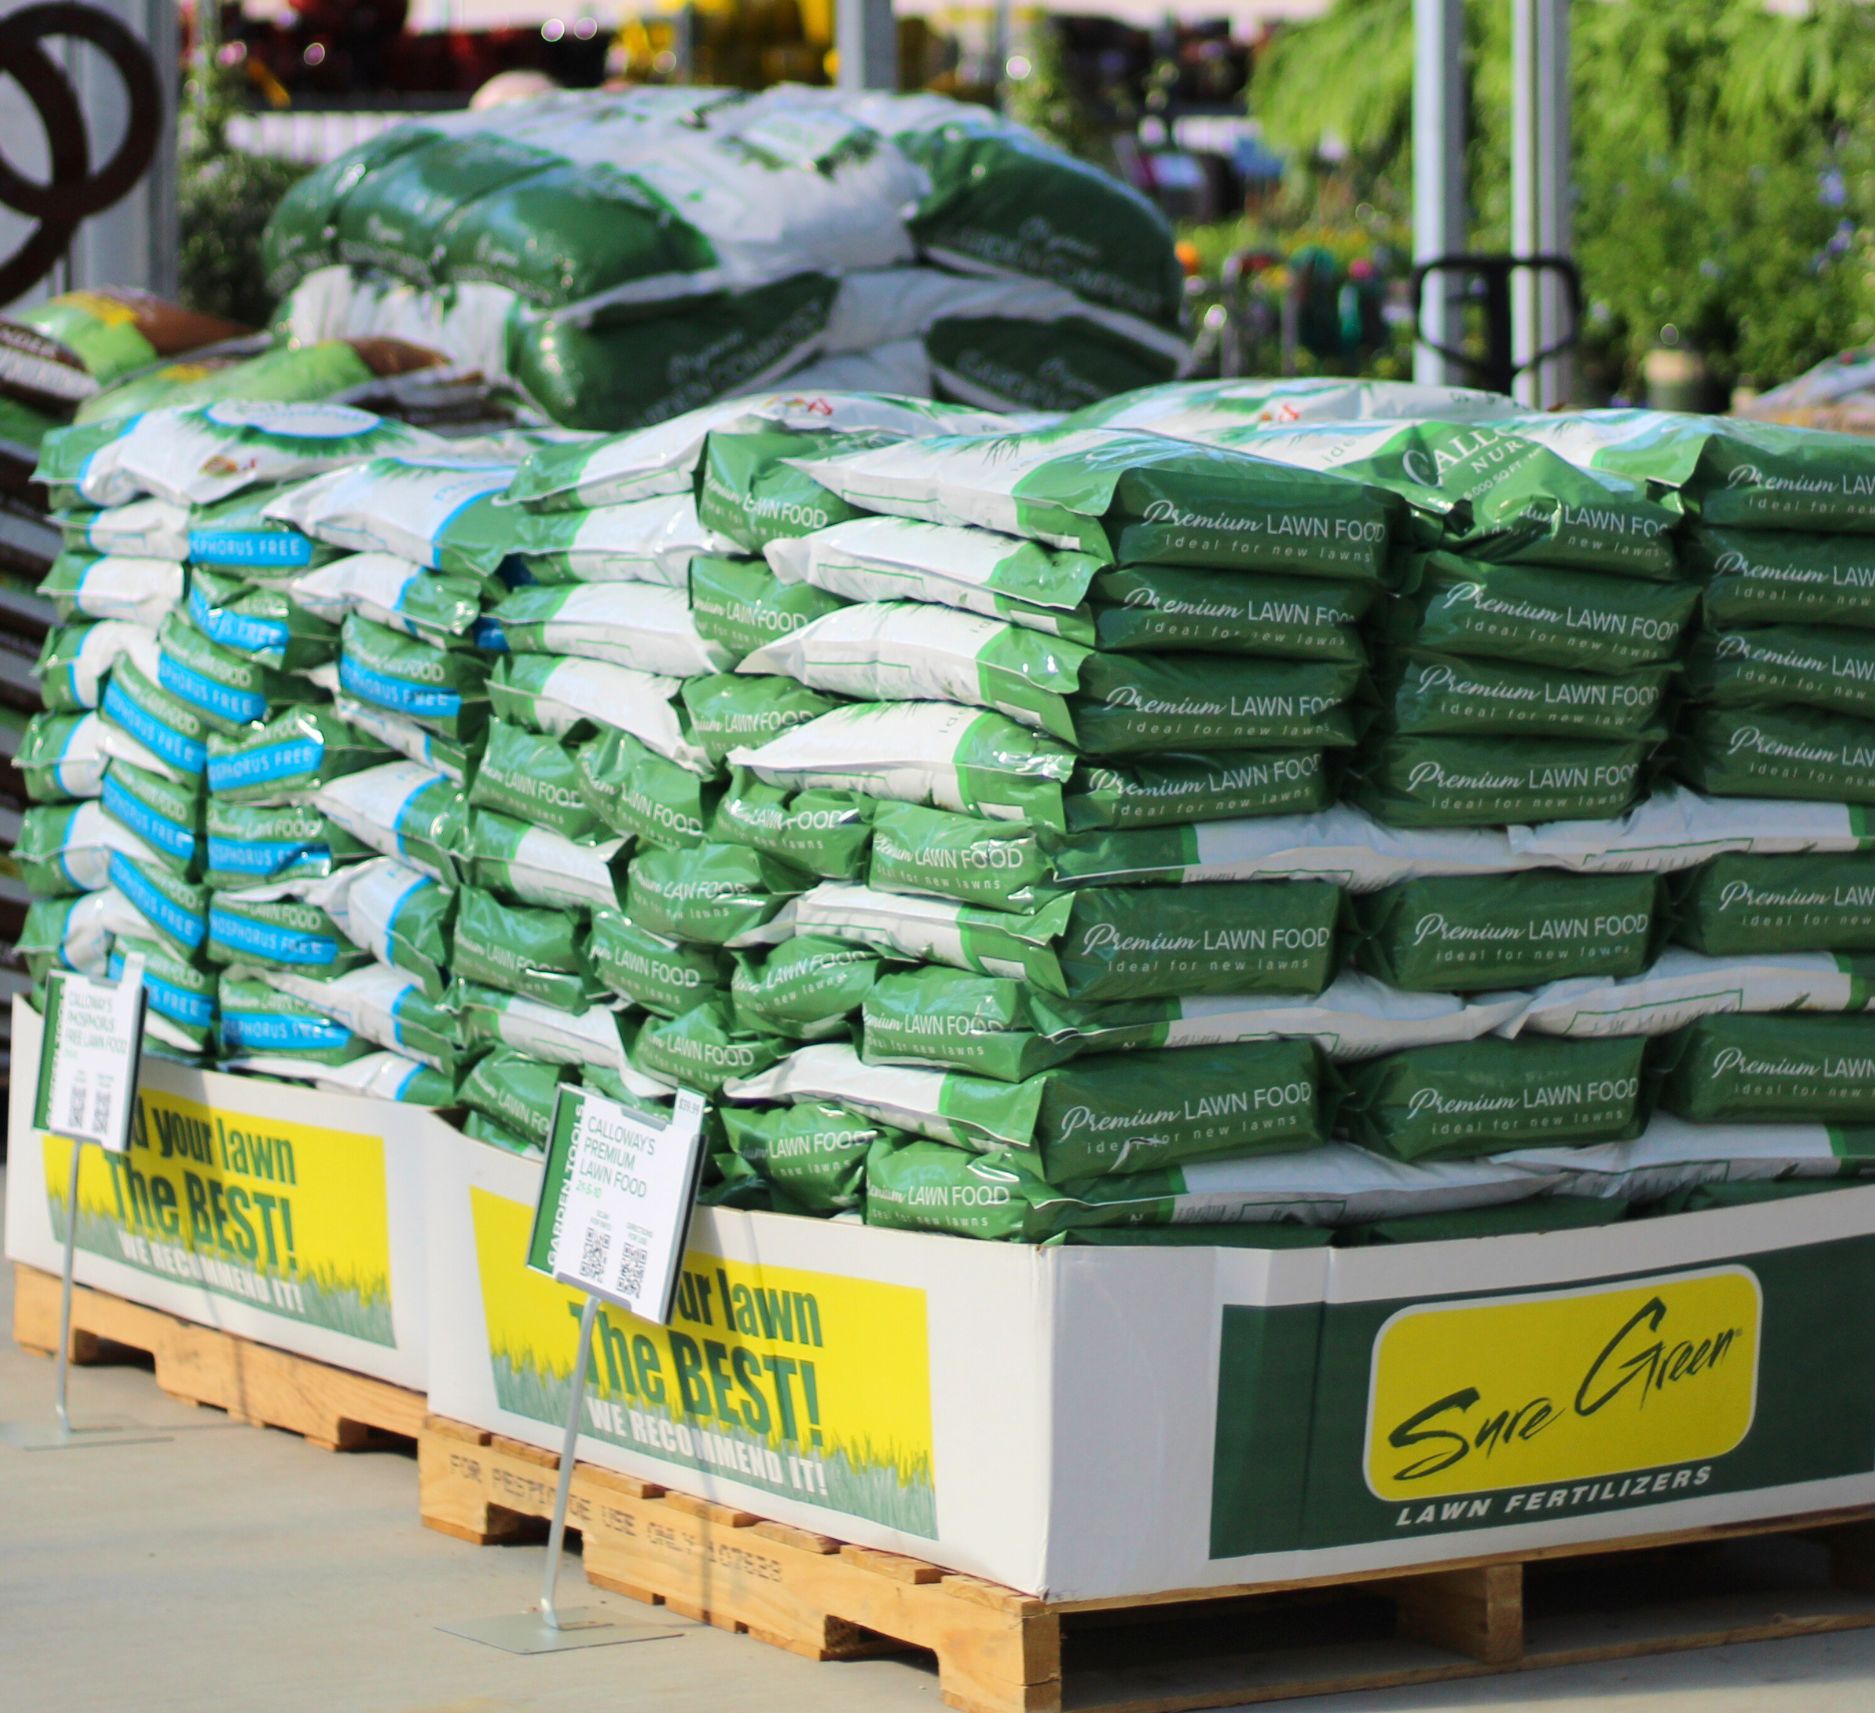 Link to Calloway's Premium Lawn Food & Phosphorus Free 	 product page